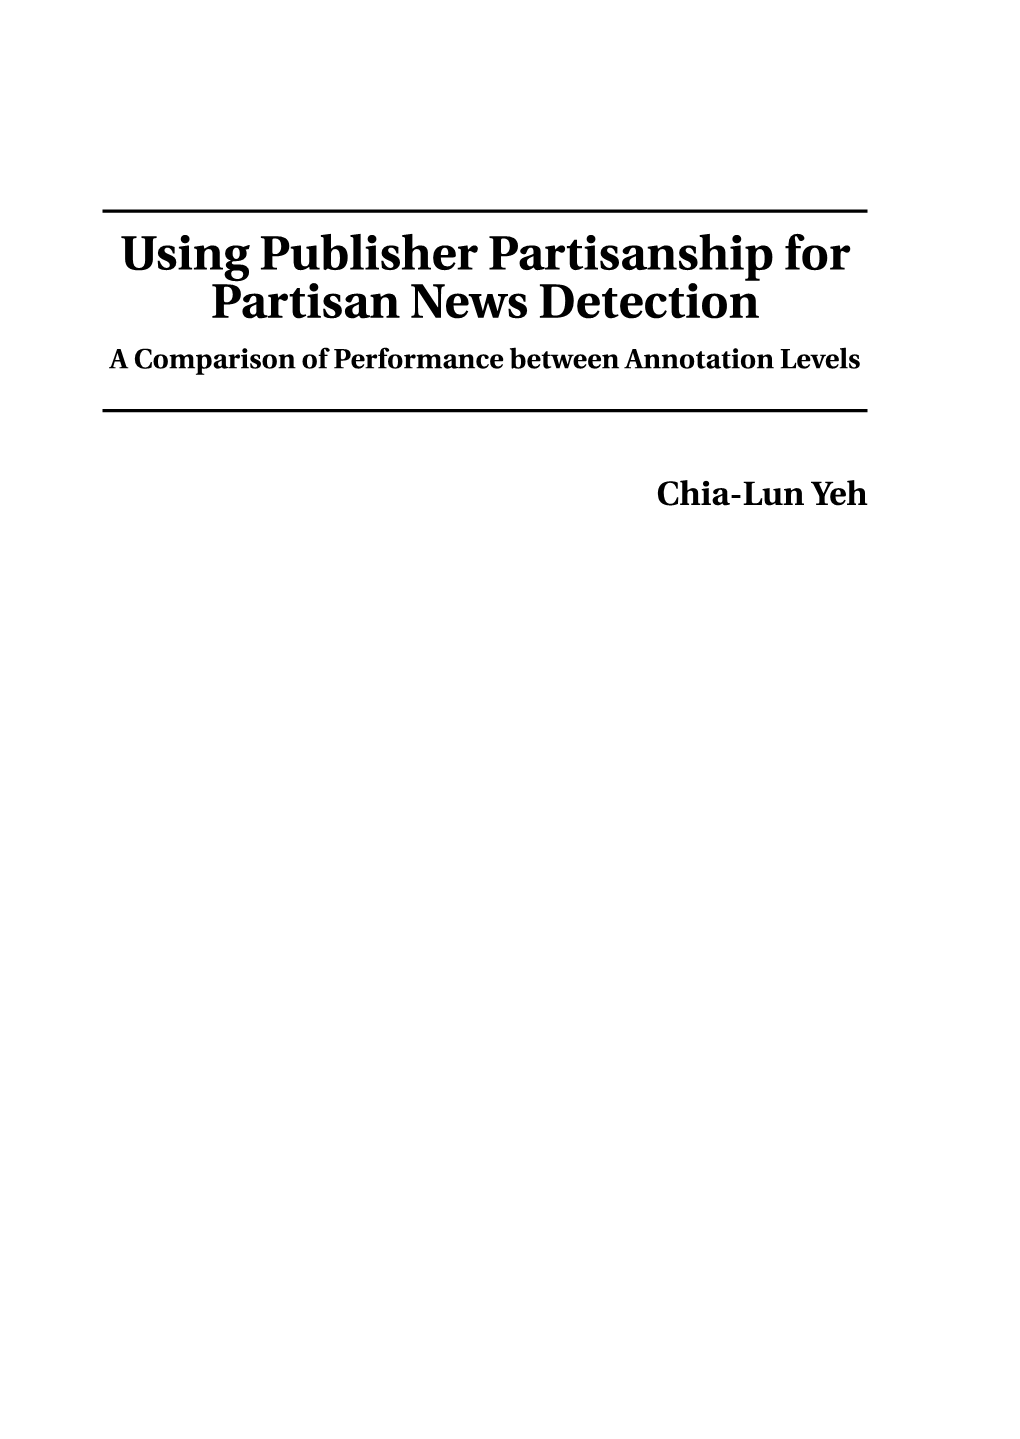 Using Publisher Partisanship for Partisan News Detection a Comparison of Performance Between Annotation Levels